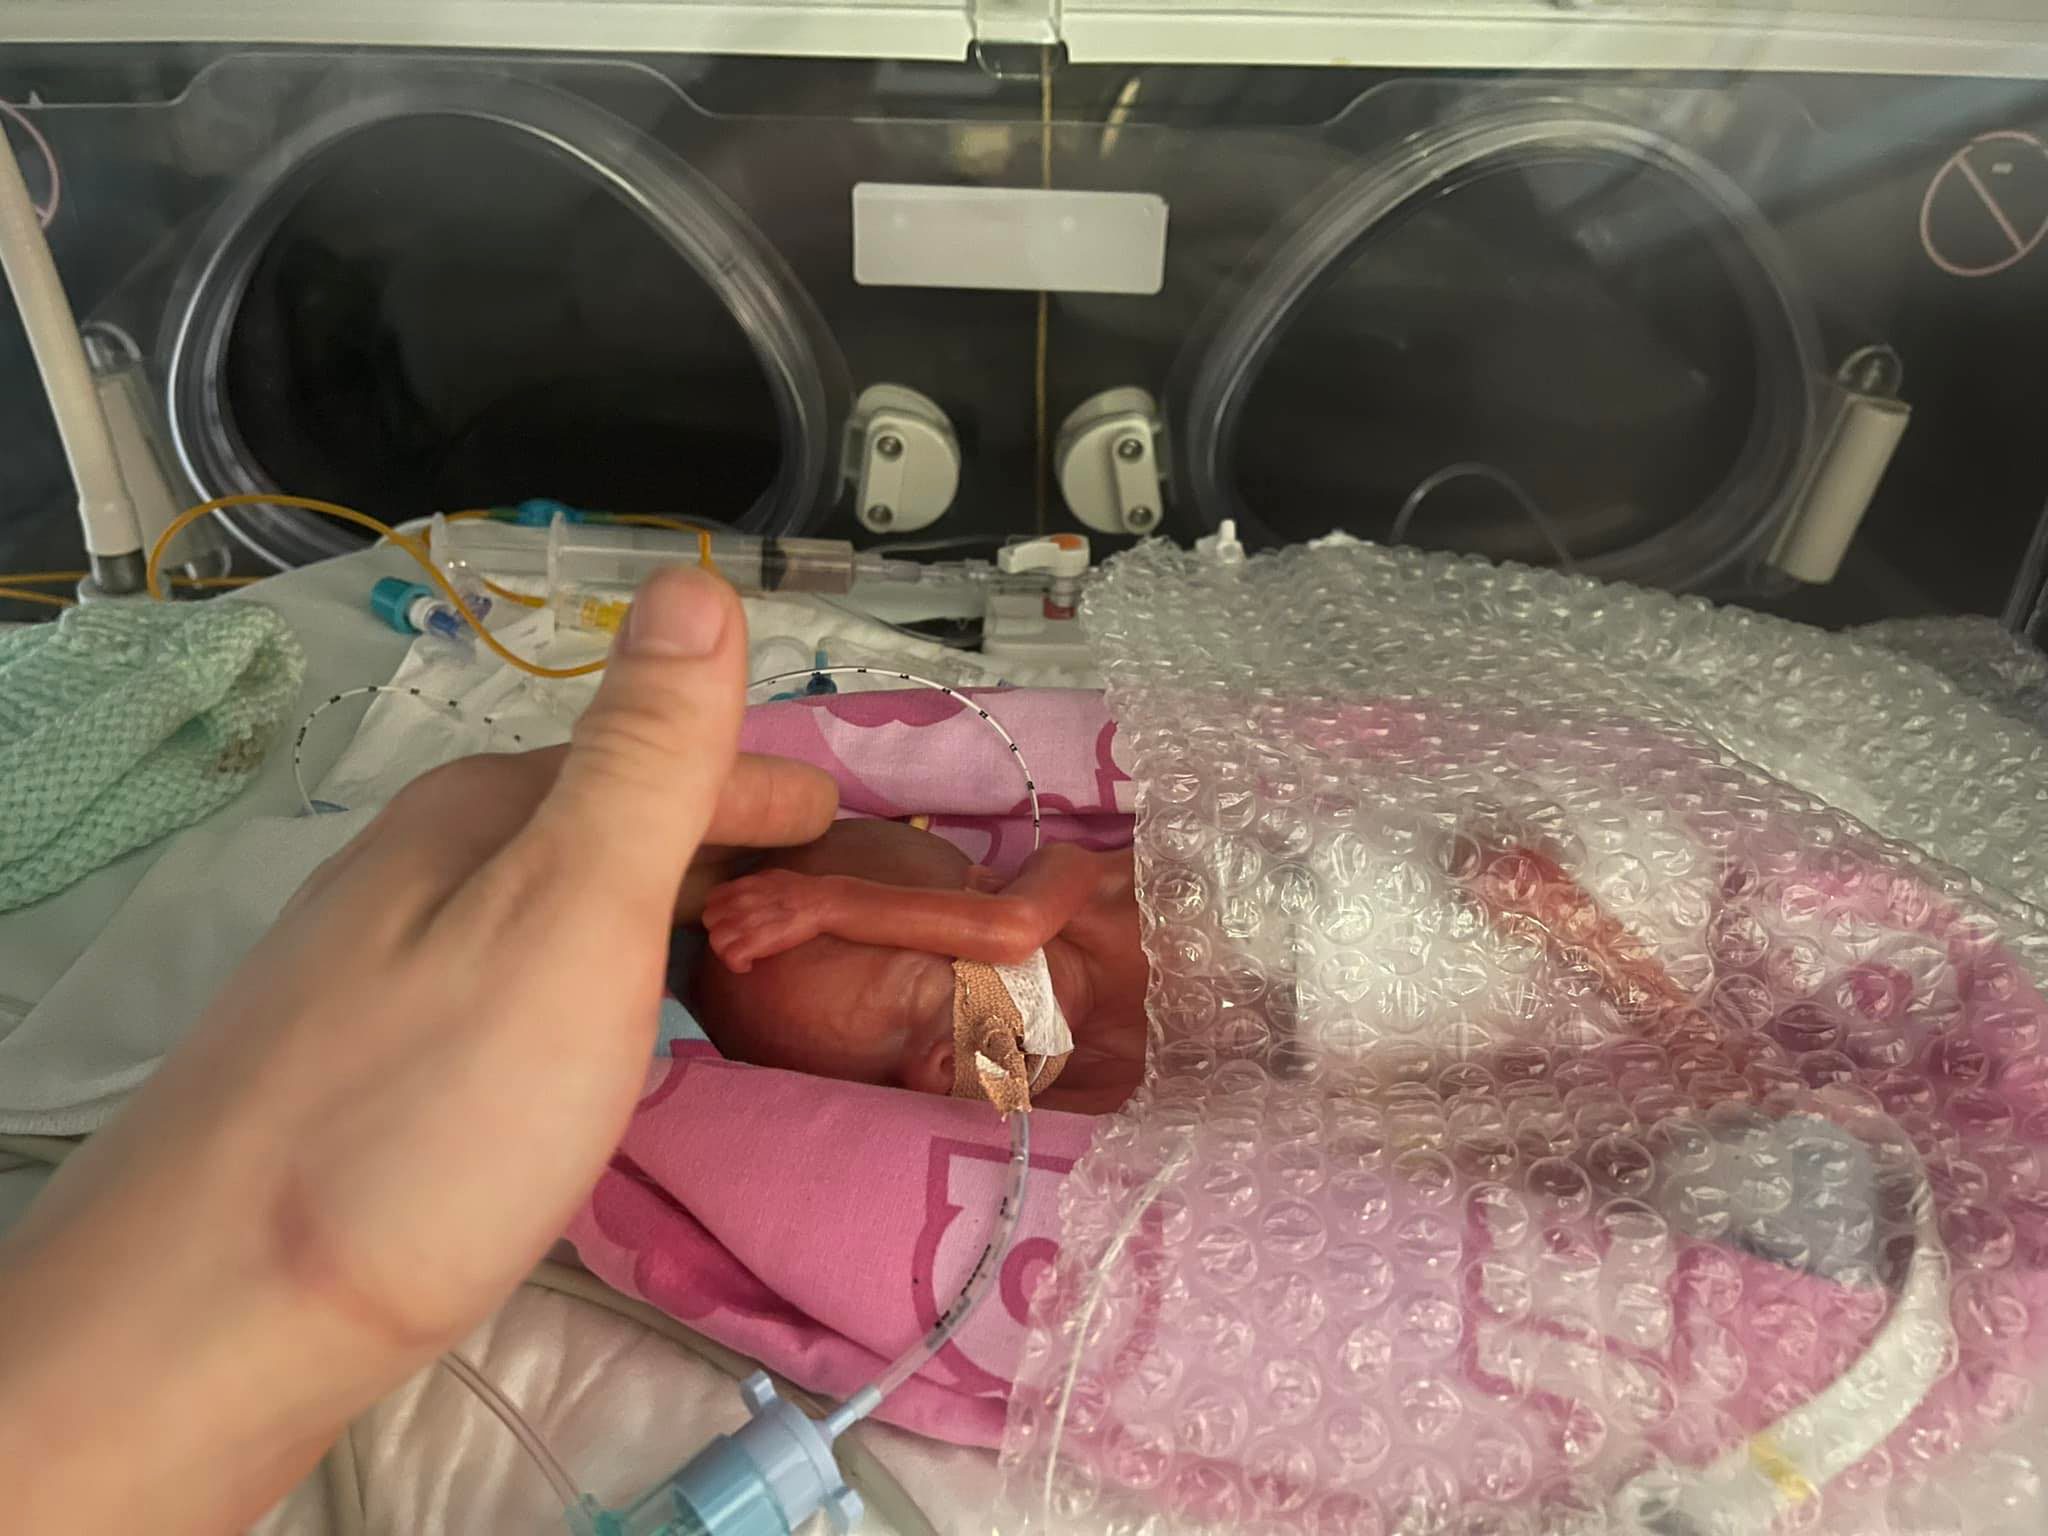 someone's hand gently petting the head of a premature baby named hannah stibbles who is laying in the icu